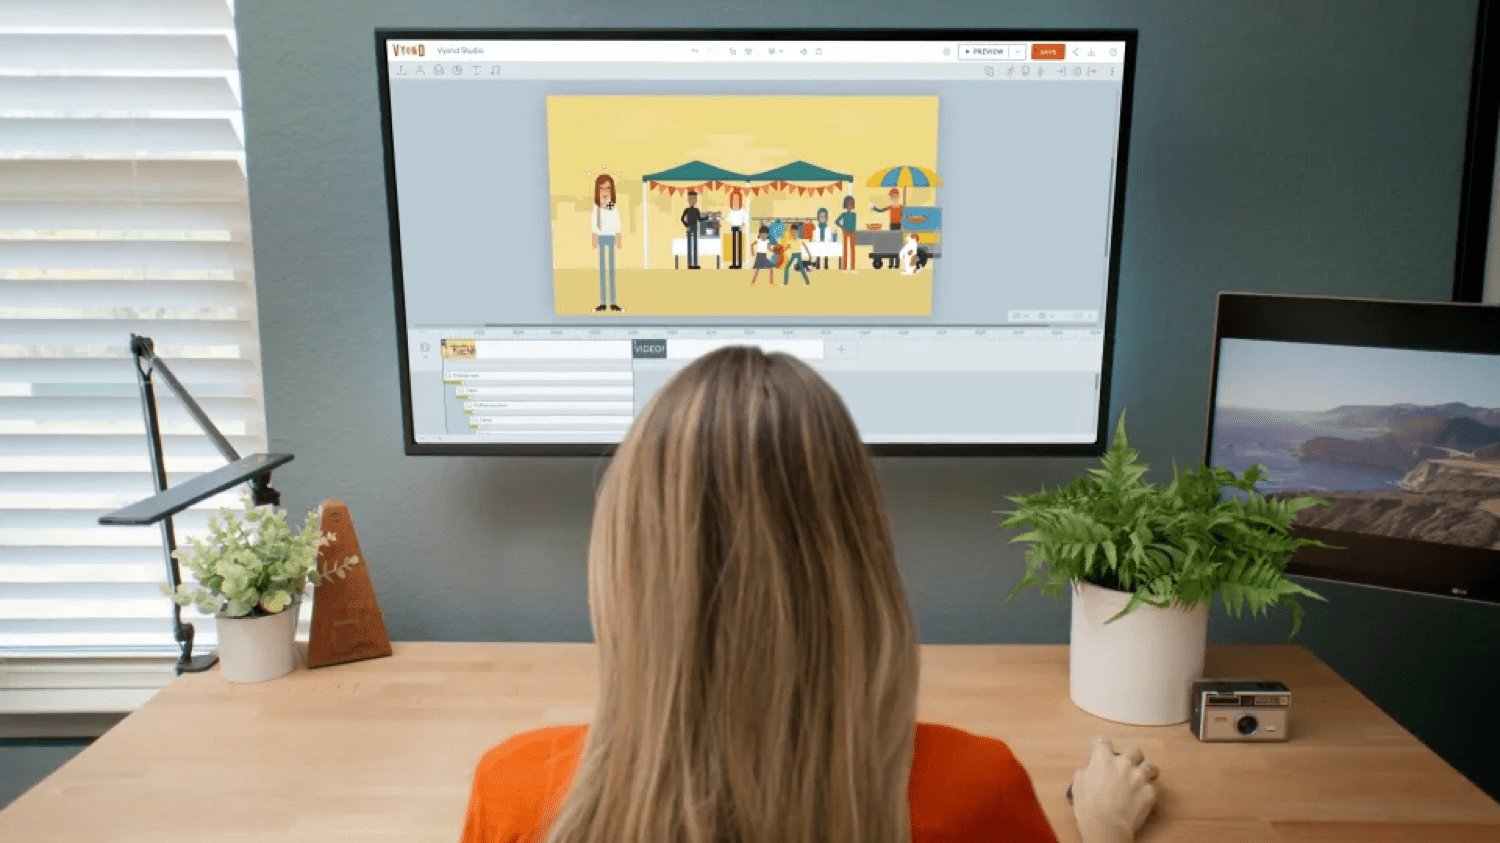 The Top 10 Animation Software for Creating Incredible Videos